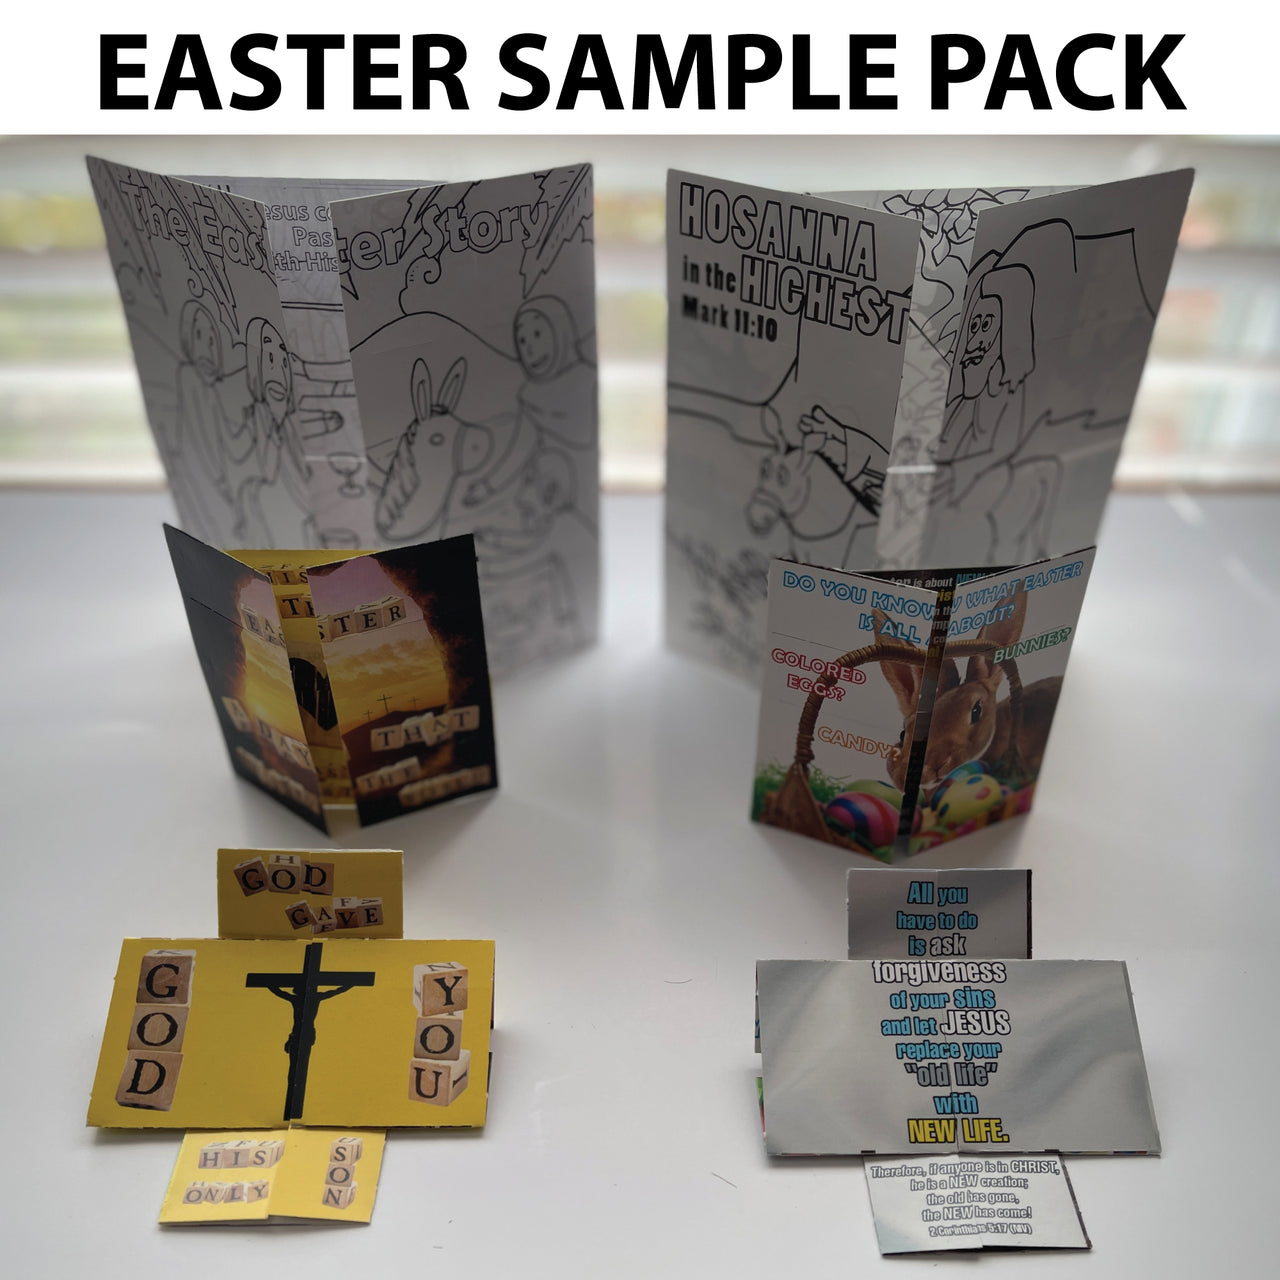 Easter Sample Pack 1 pack per customer - Free just pay for shipping